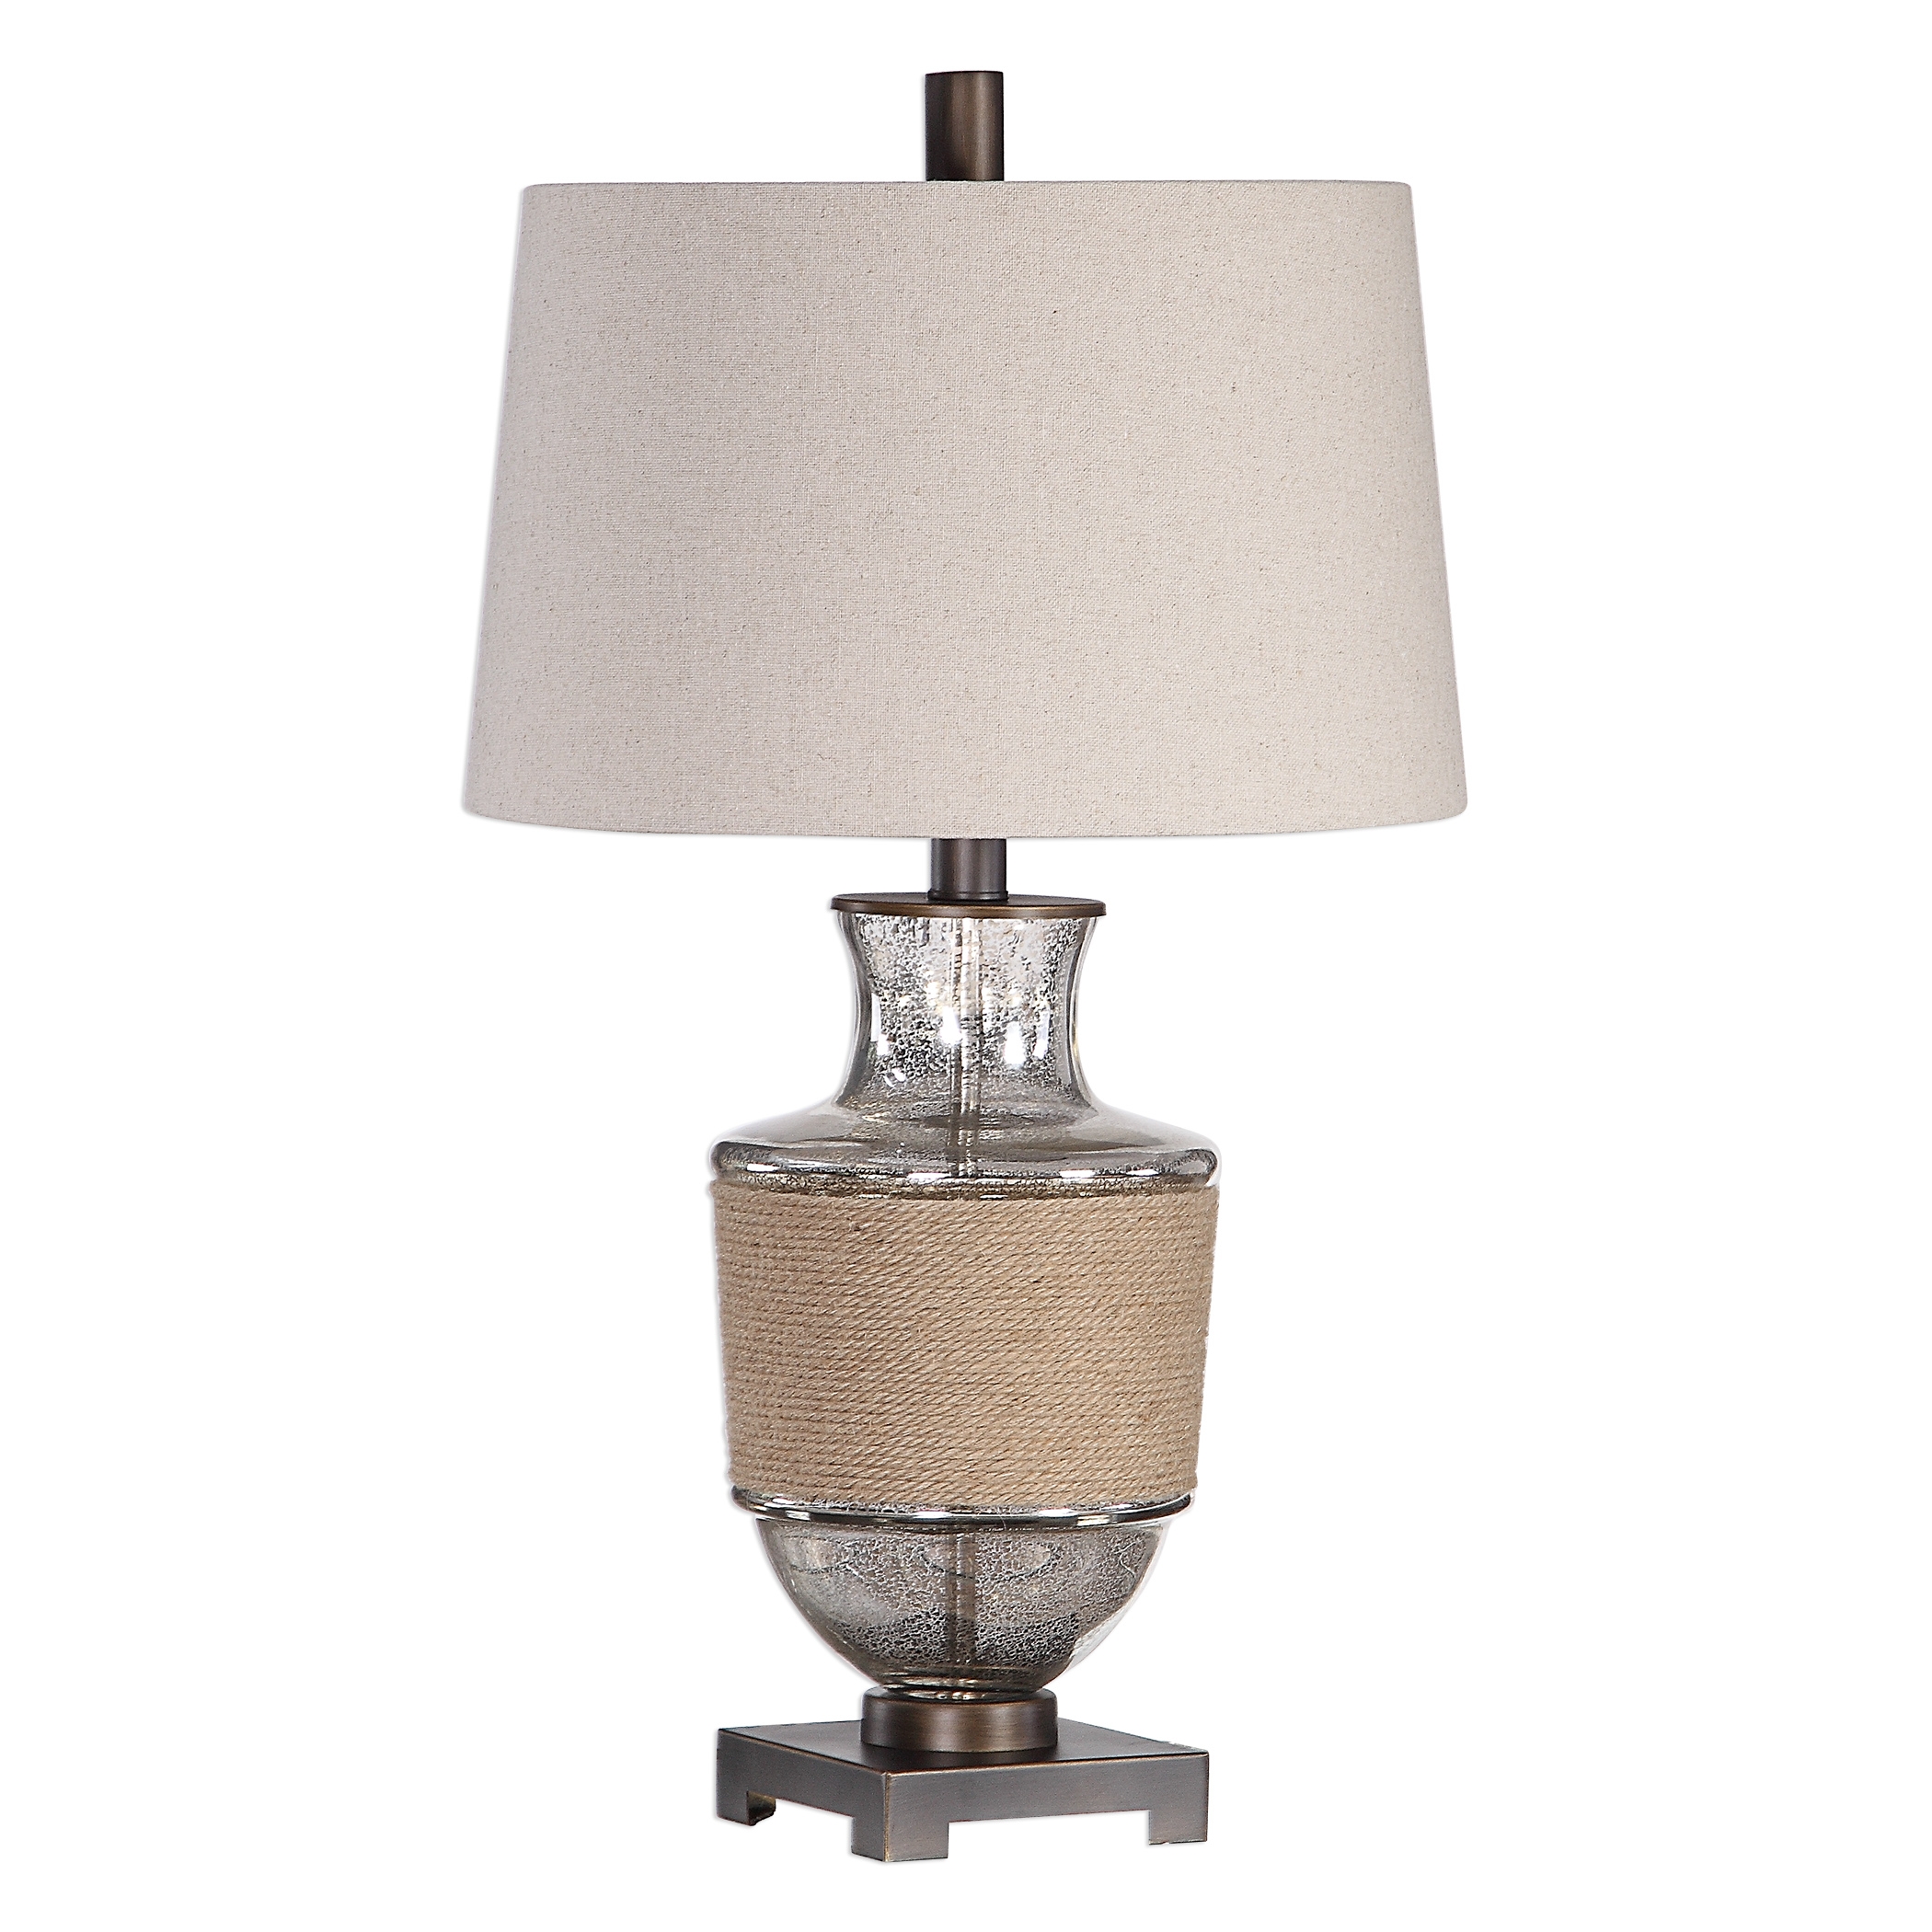 TABLE LAMP - Image 5